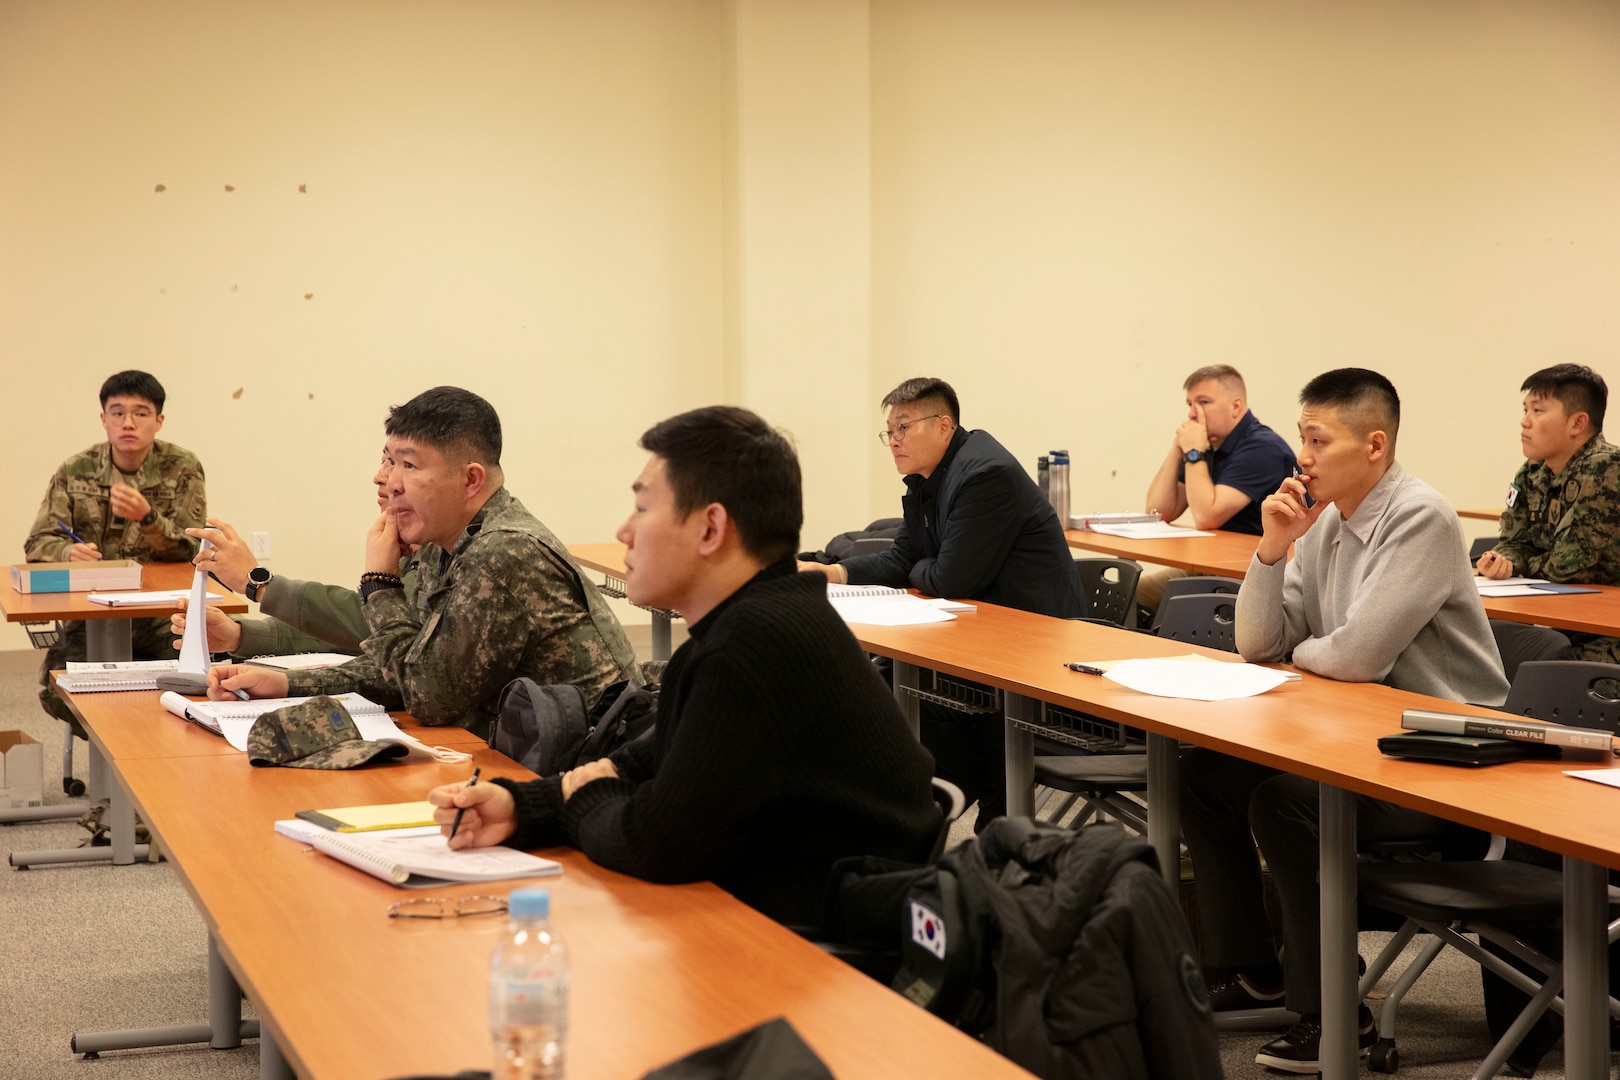 Defense Operations Security Planners Course (DOPC) exercise training event, for members of ROK Joint Chiefs of Staff Office and other elements of ROK unit military personnel the week of Jan. 22-26.  This course was presented in Hangul and English. With the purpose to train units and organizations to better protect operations, activities, and investments during the OPSEC Military Decision-Making Process planning.